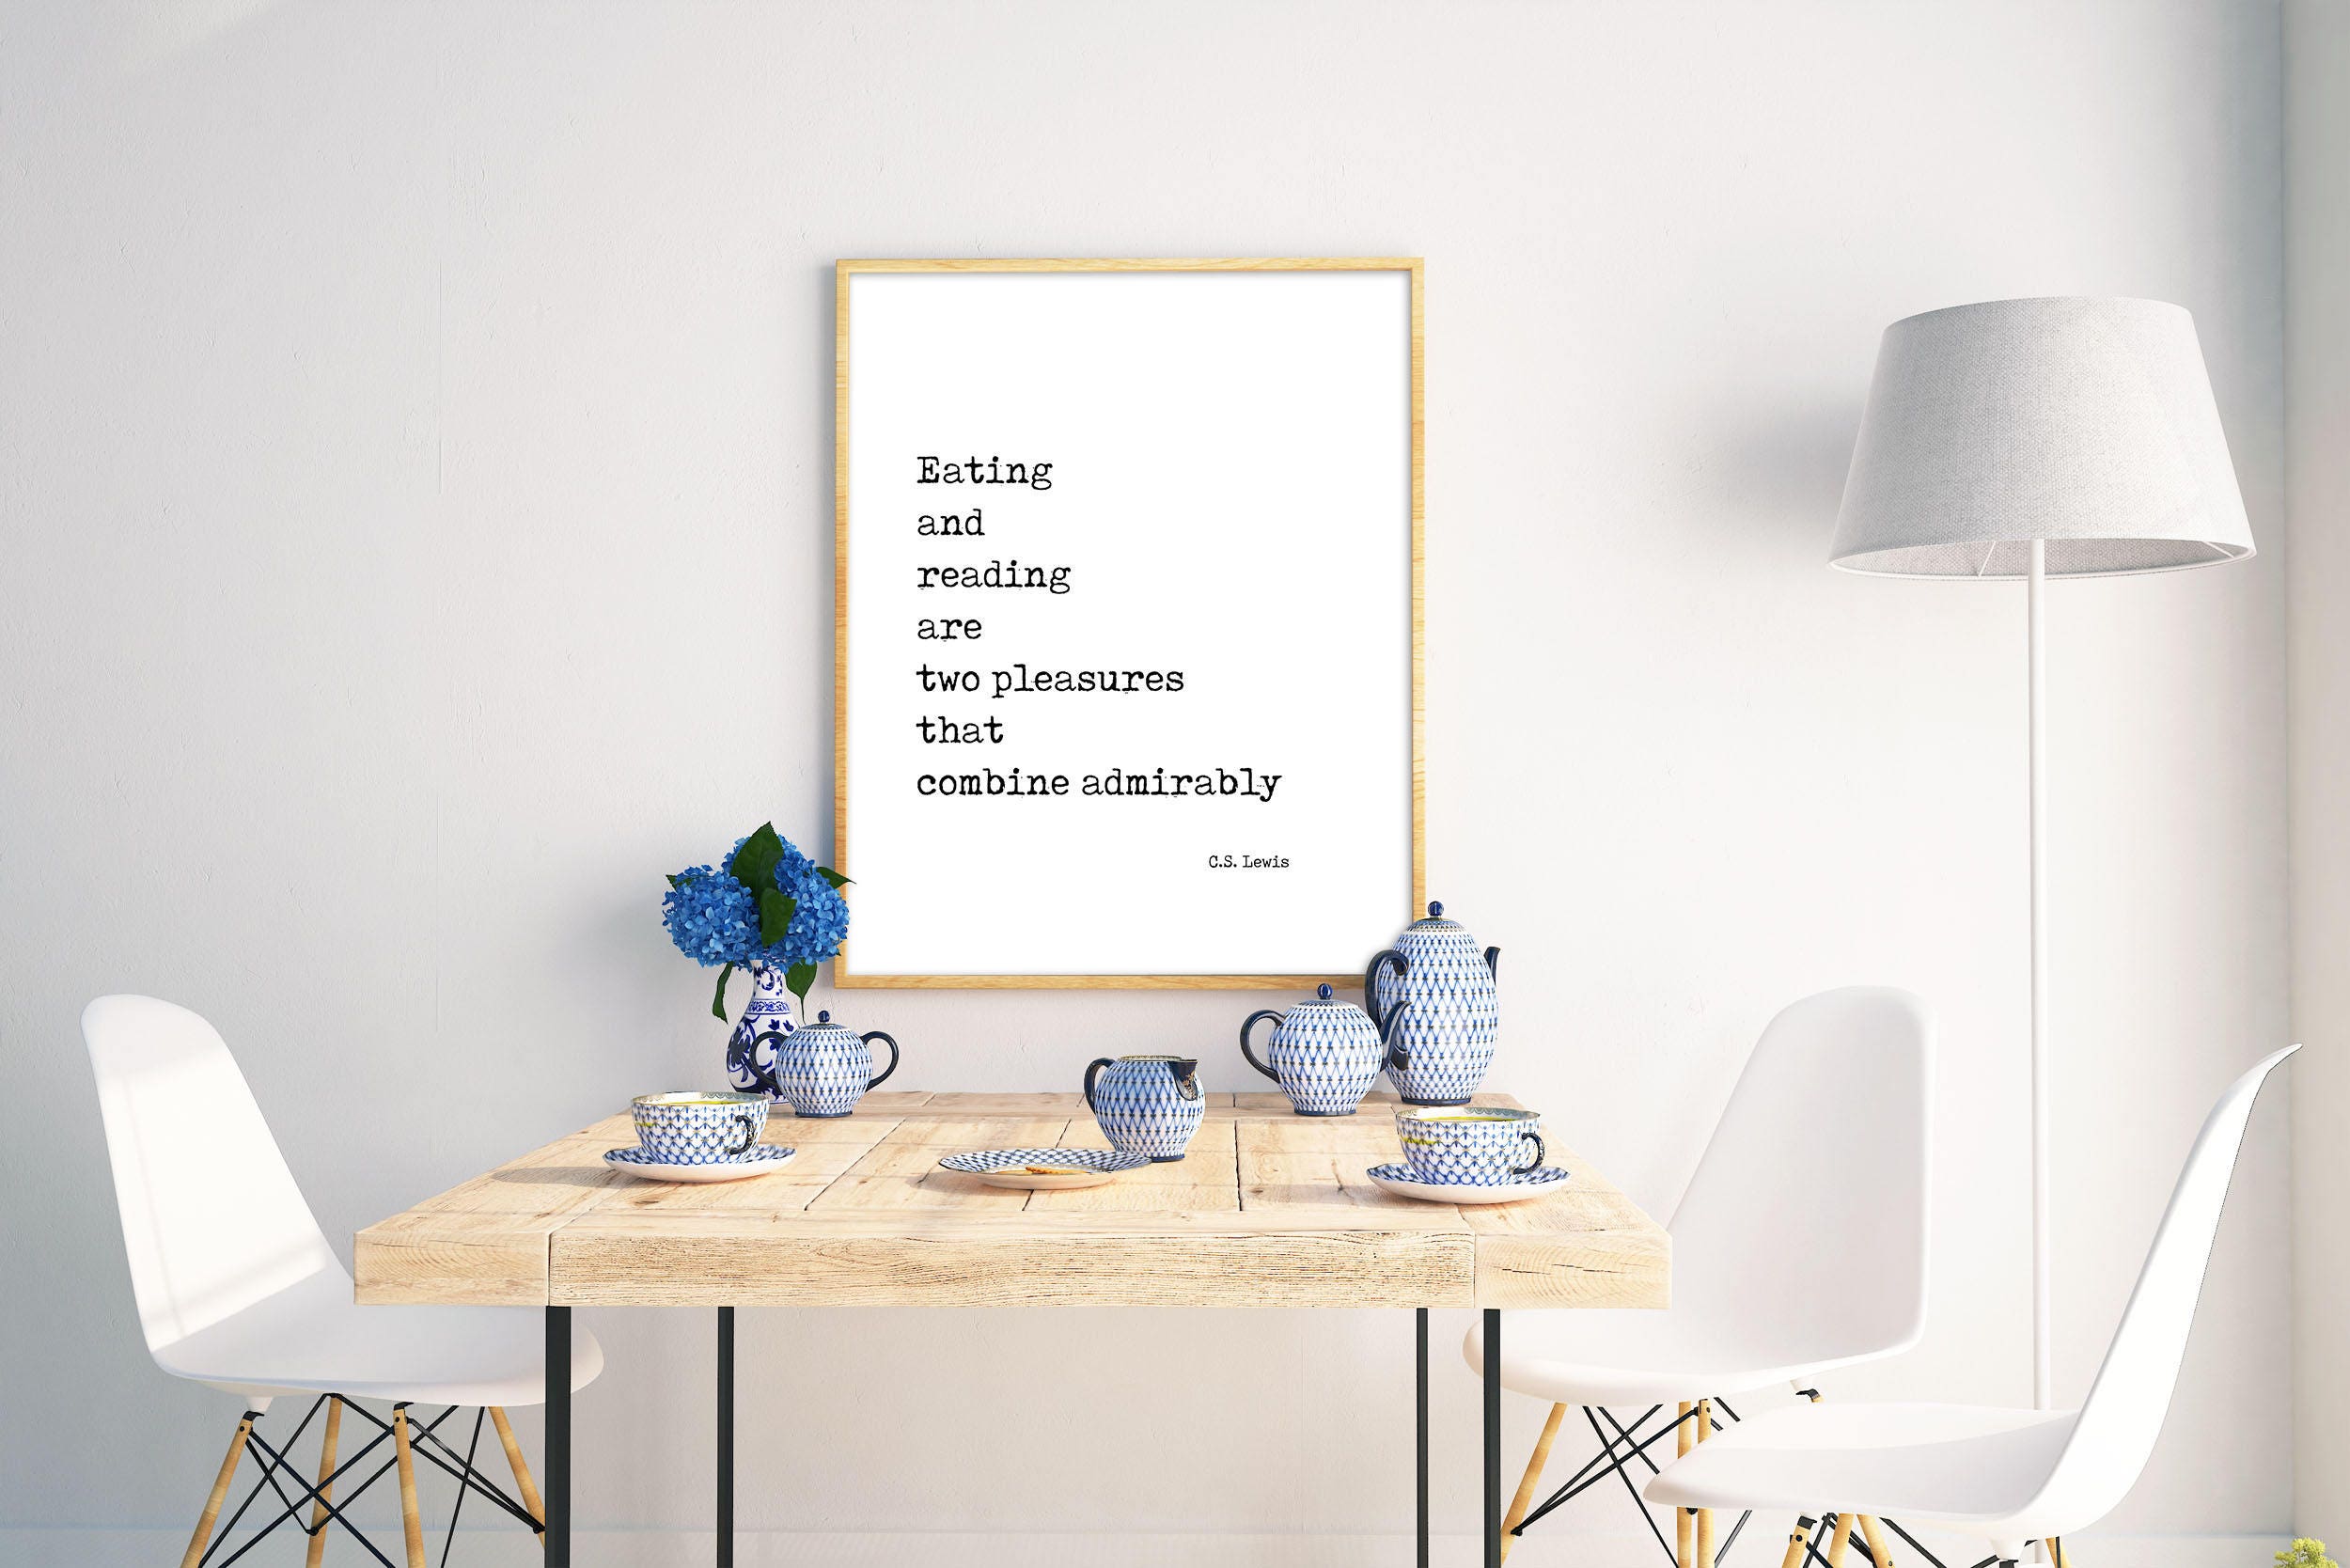 C S Lewis Wall Art Prints, Eating and reading are two pleasures that combine admirably